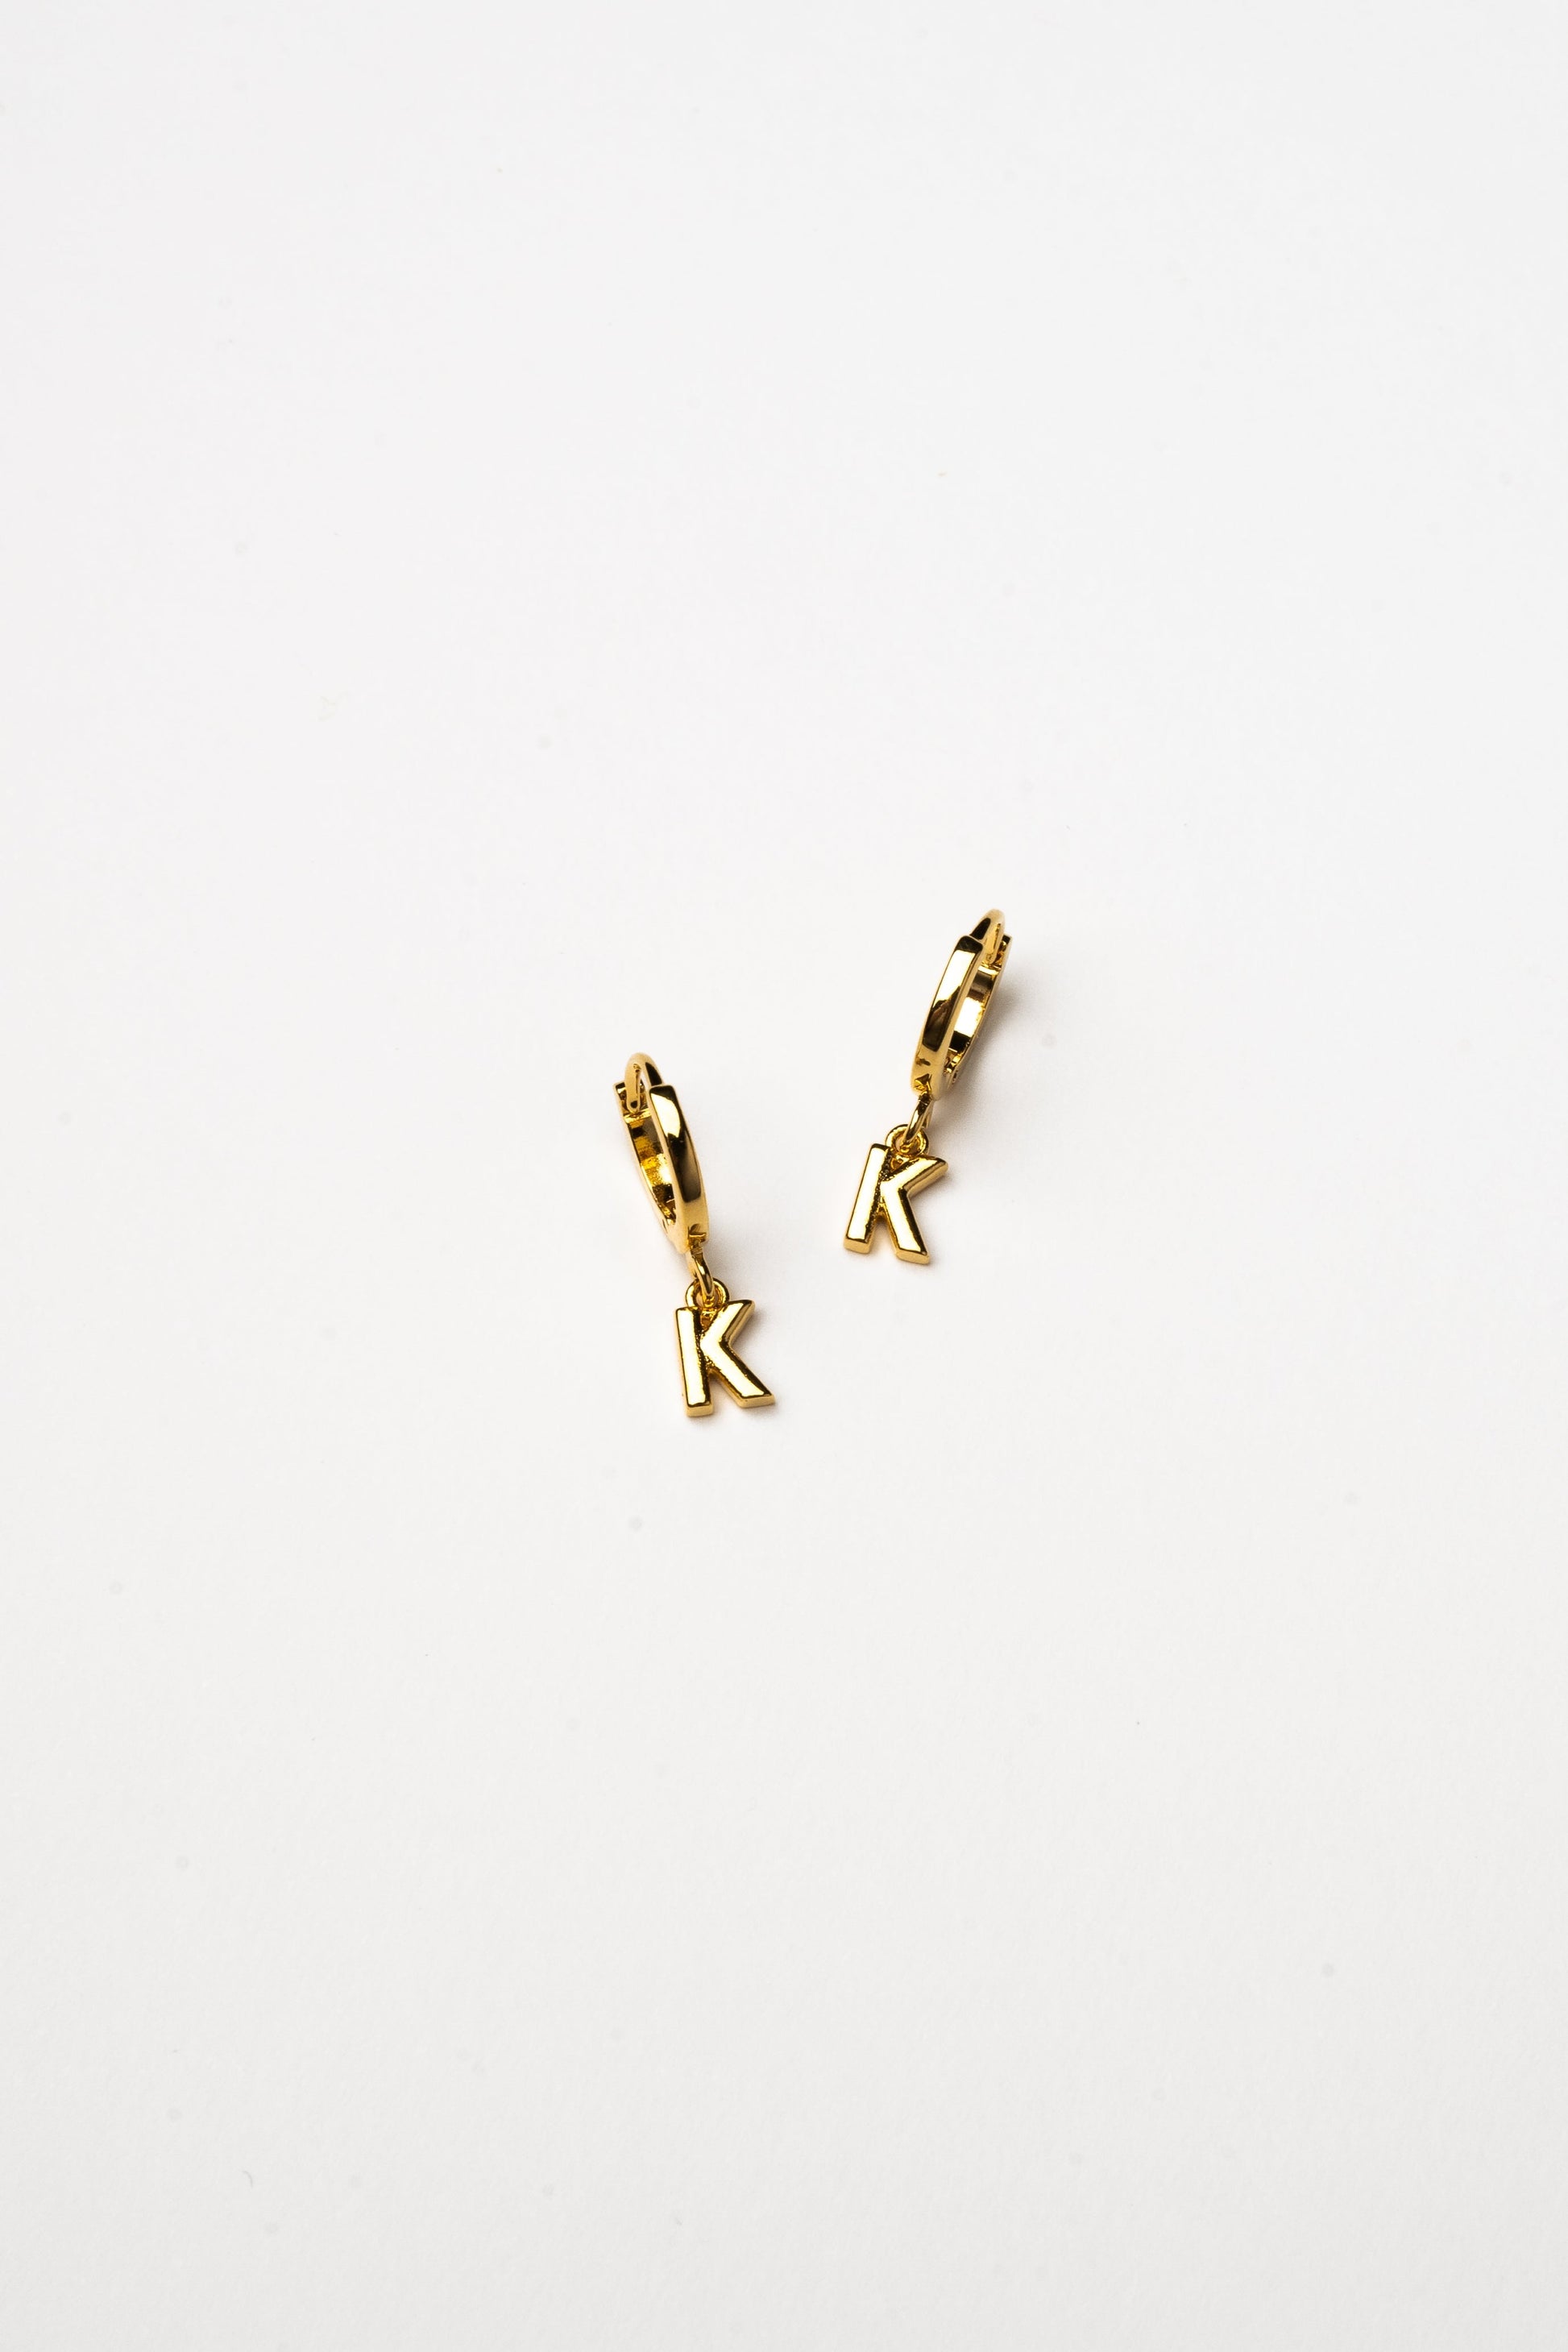 Cove Initial Letter Huggie Earrings WOMEN'S EARINGS Cove Accessories K 18k Gold Plated 